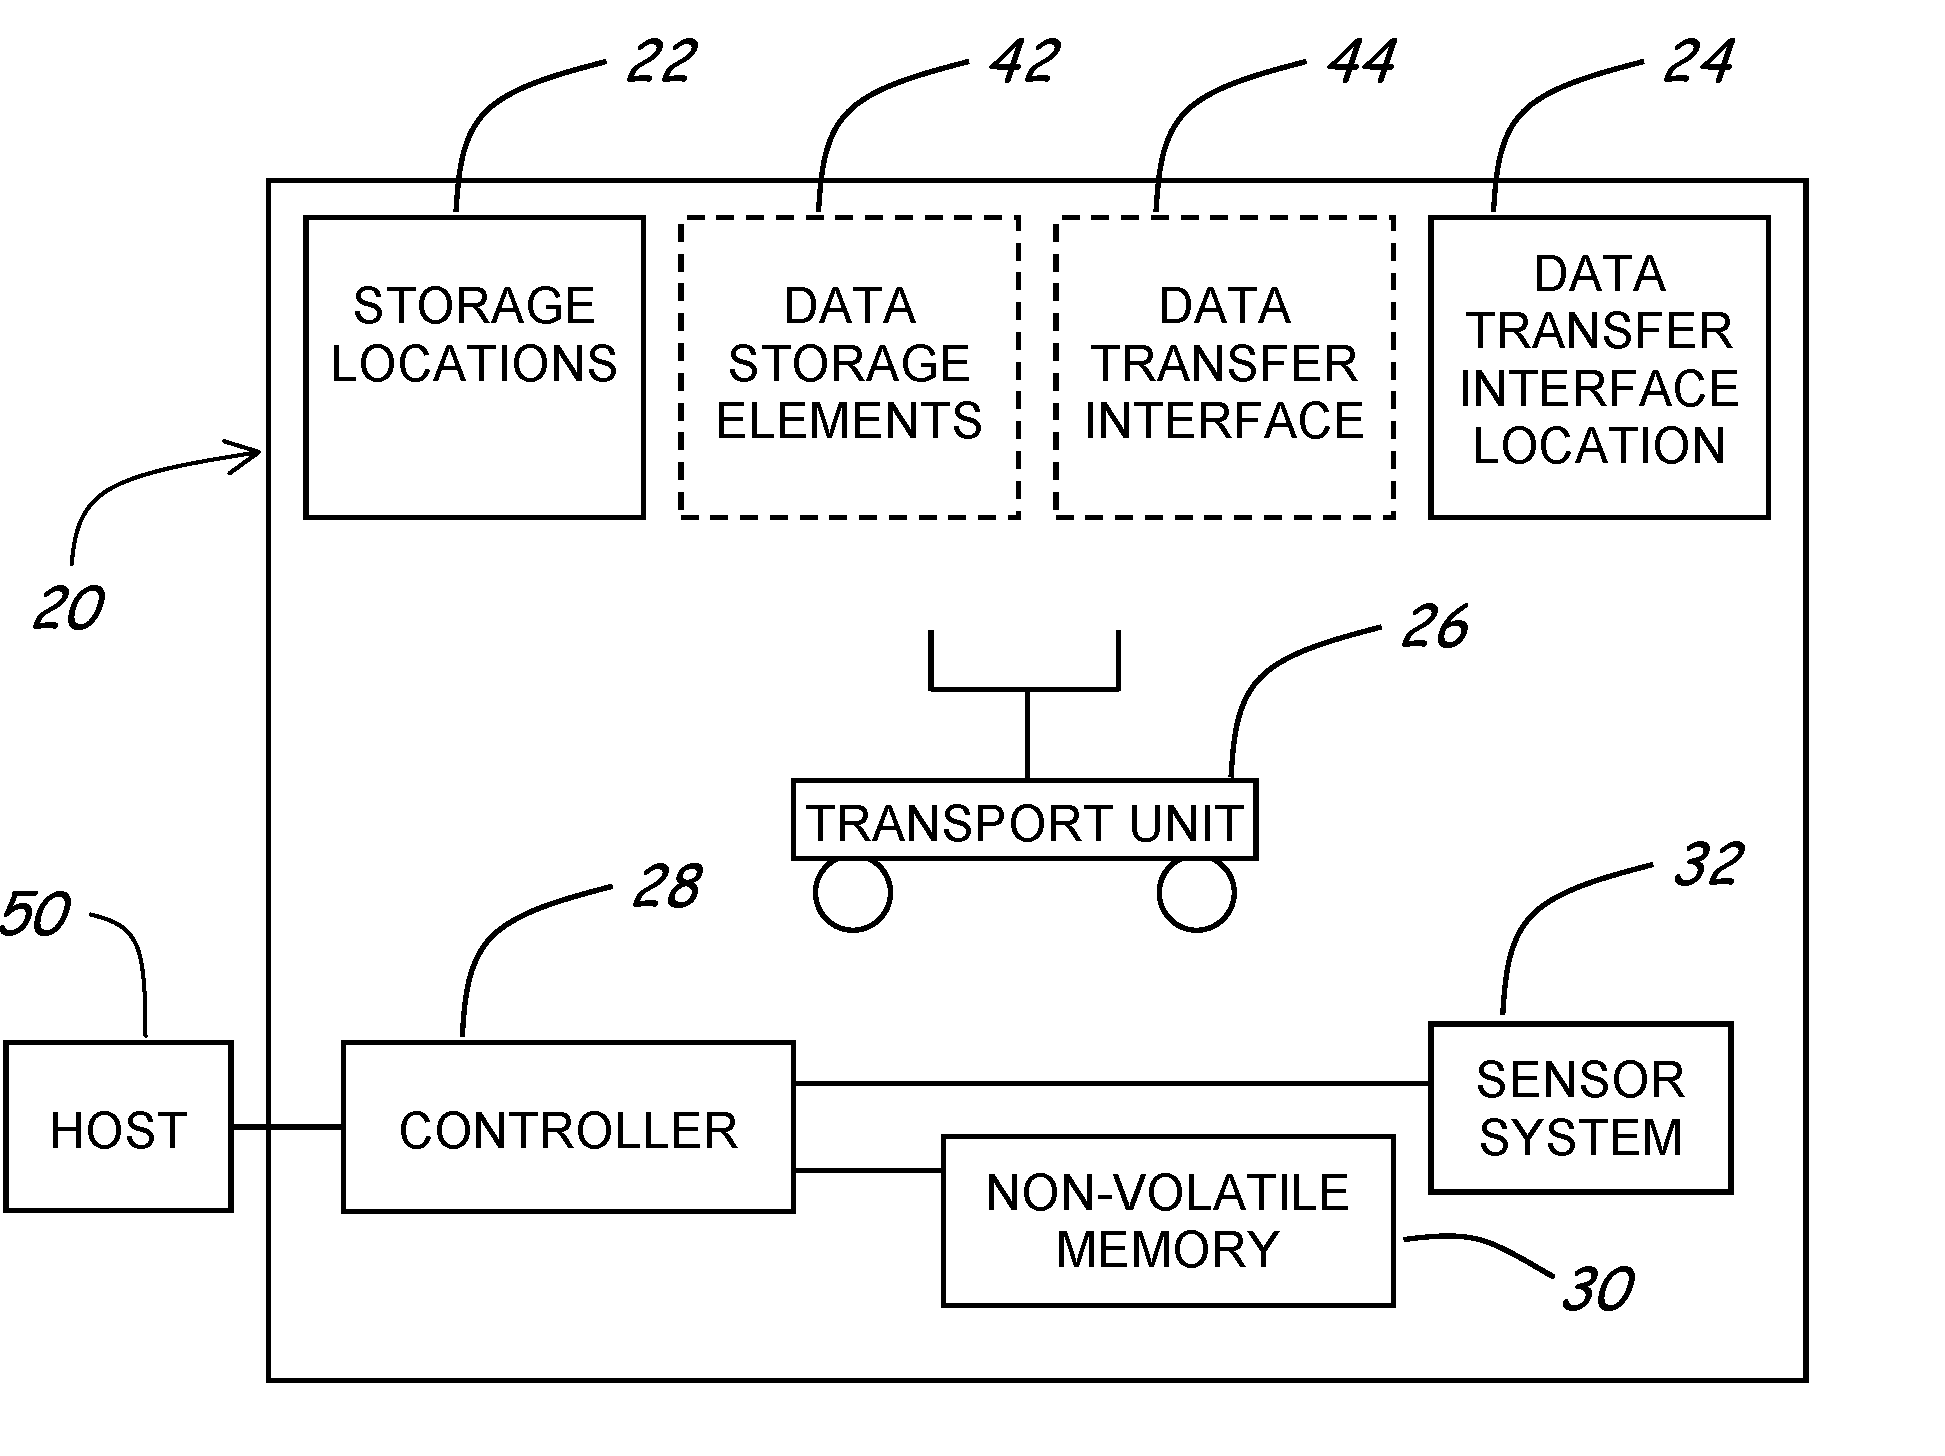 Robotic Data Storage Library With the Ability to Reduce the Transition Time to Reach an Operational State After a Transition From a Power-Off State to a Power-On State